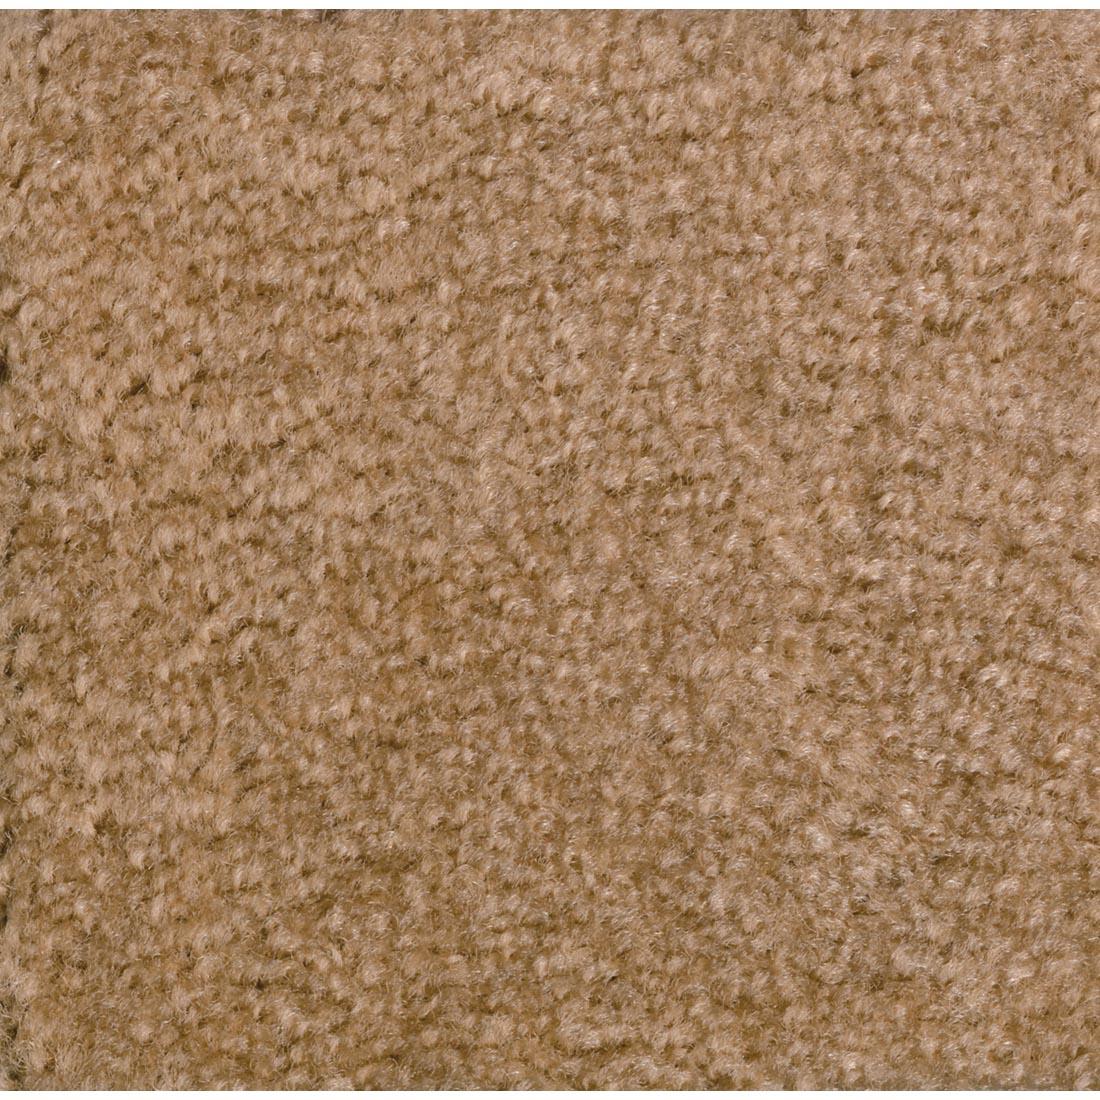 Sahara-colored carpet swatch from the Rectangle Rug by Carpets For Kids